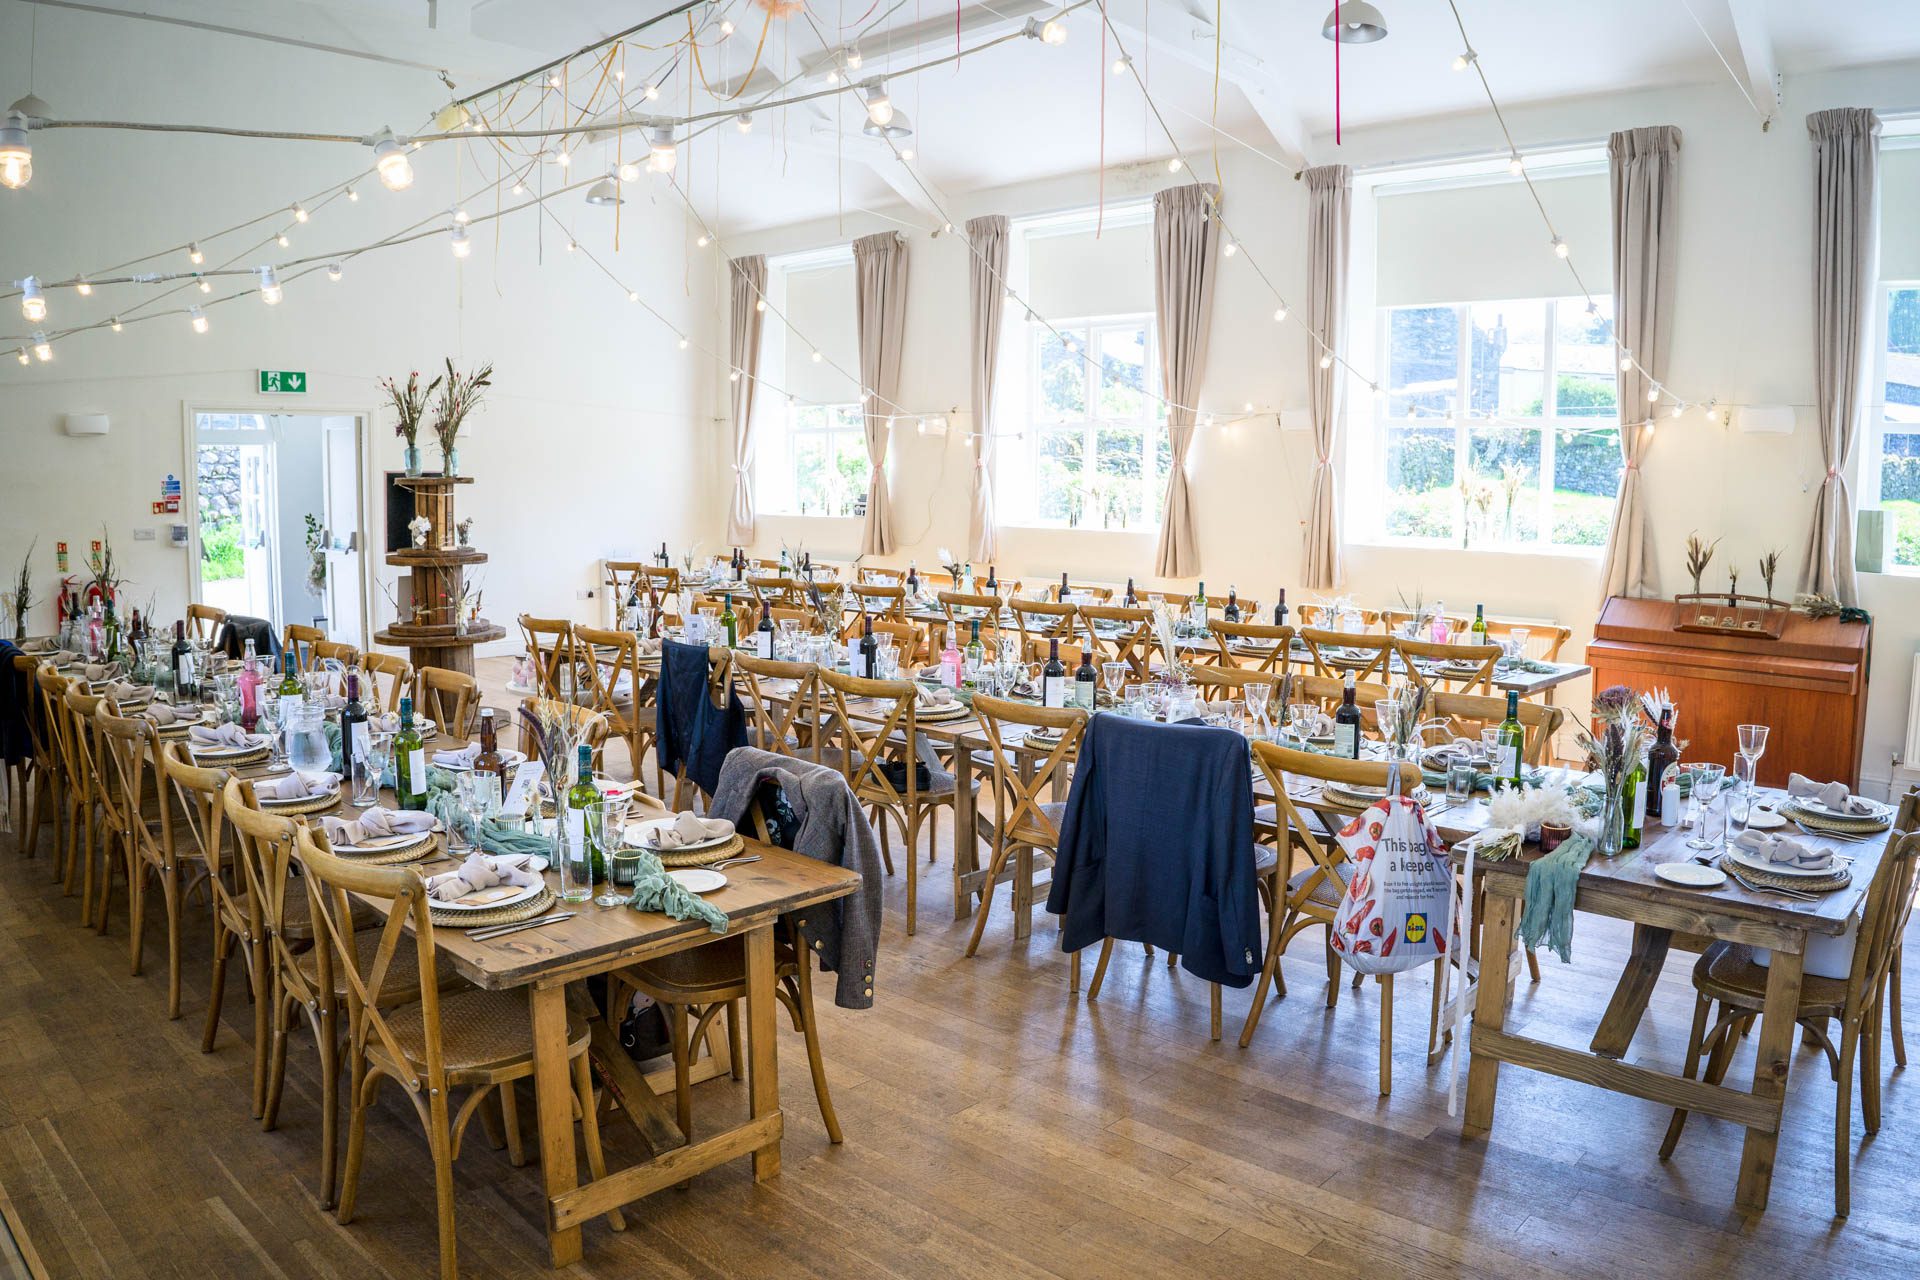 A Borrowdale Wedding - the Borrowdale Institute decorated and set up for the wedding breakfast